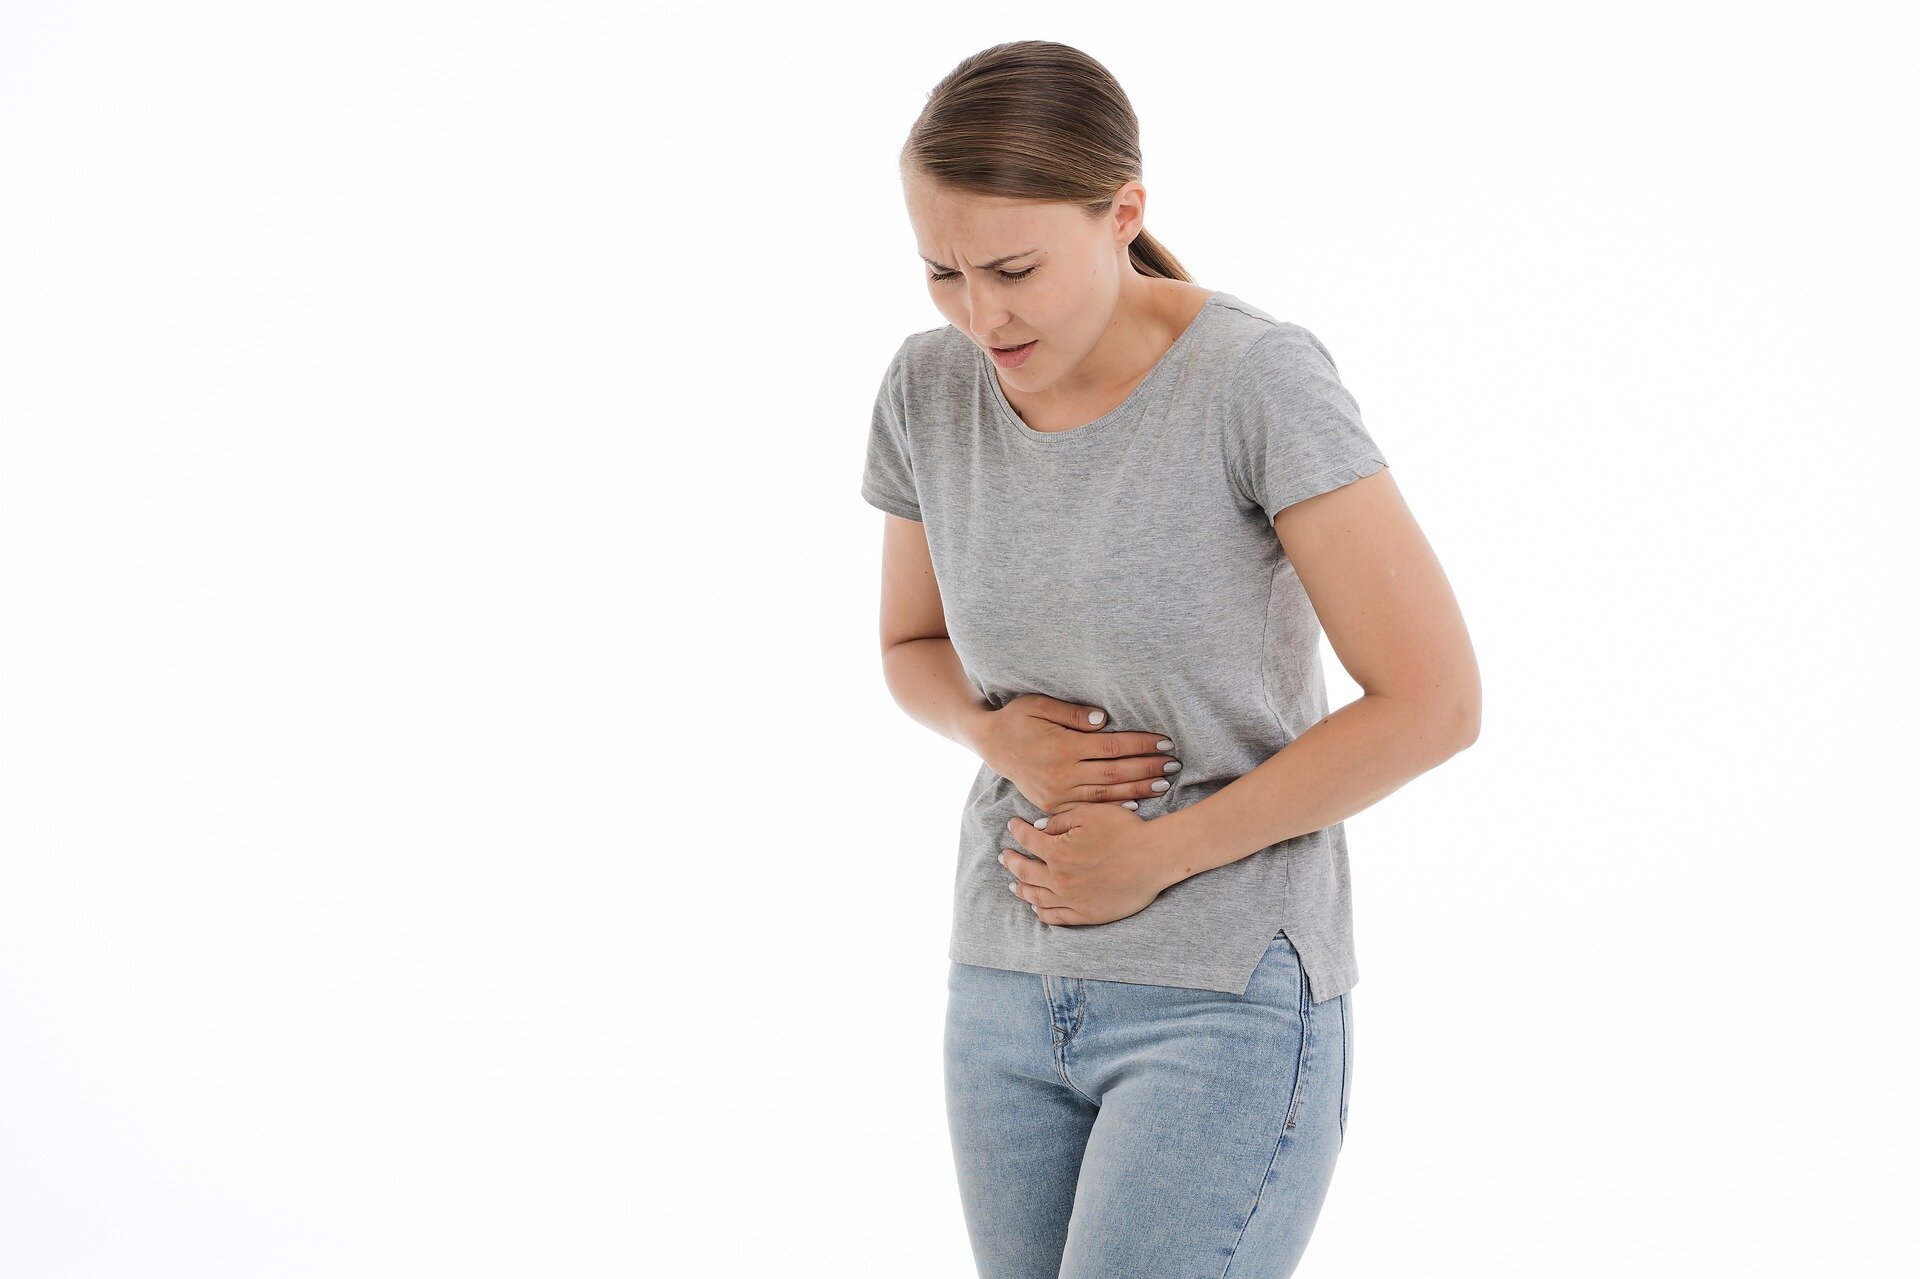 #A major clinical trial shows how to reduce the risk of stomach bleeding occasionally caused by regular aspirin use